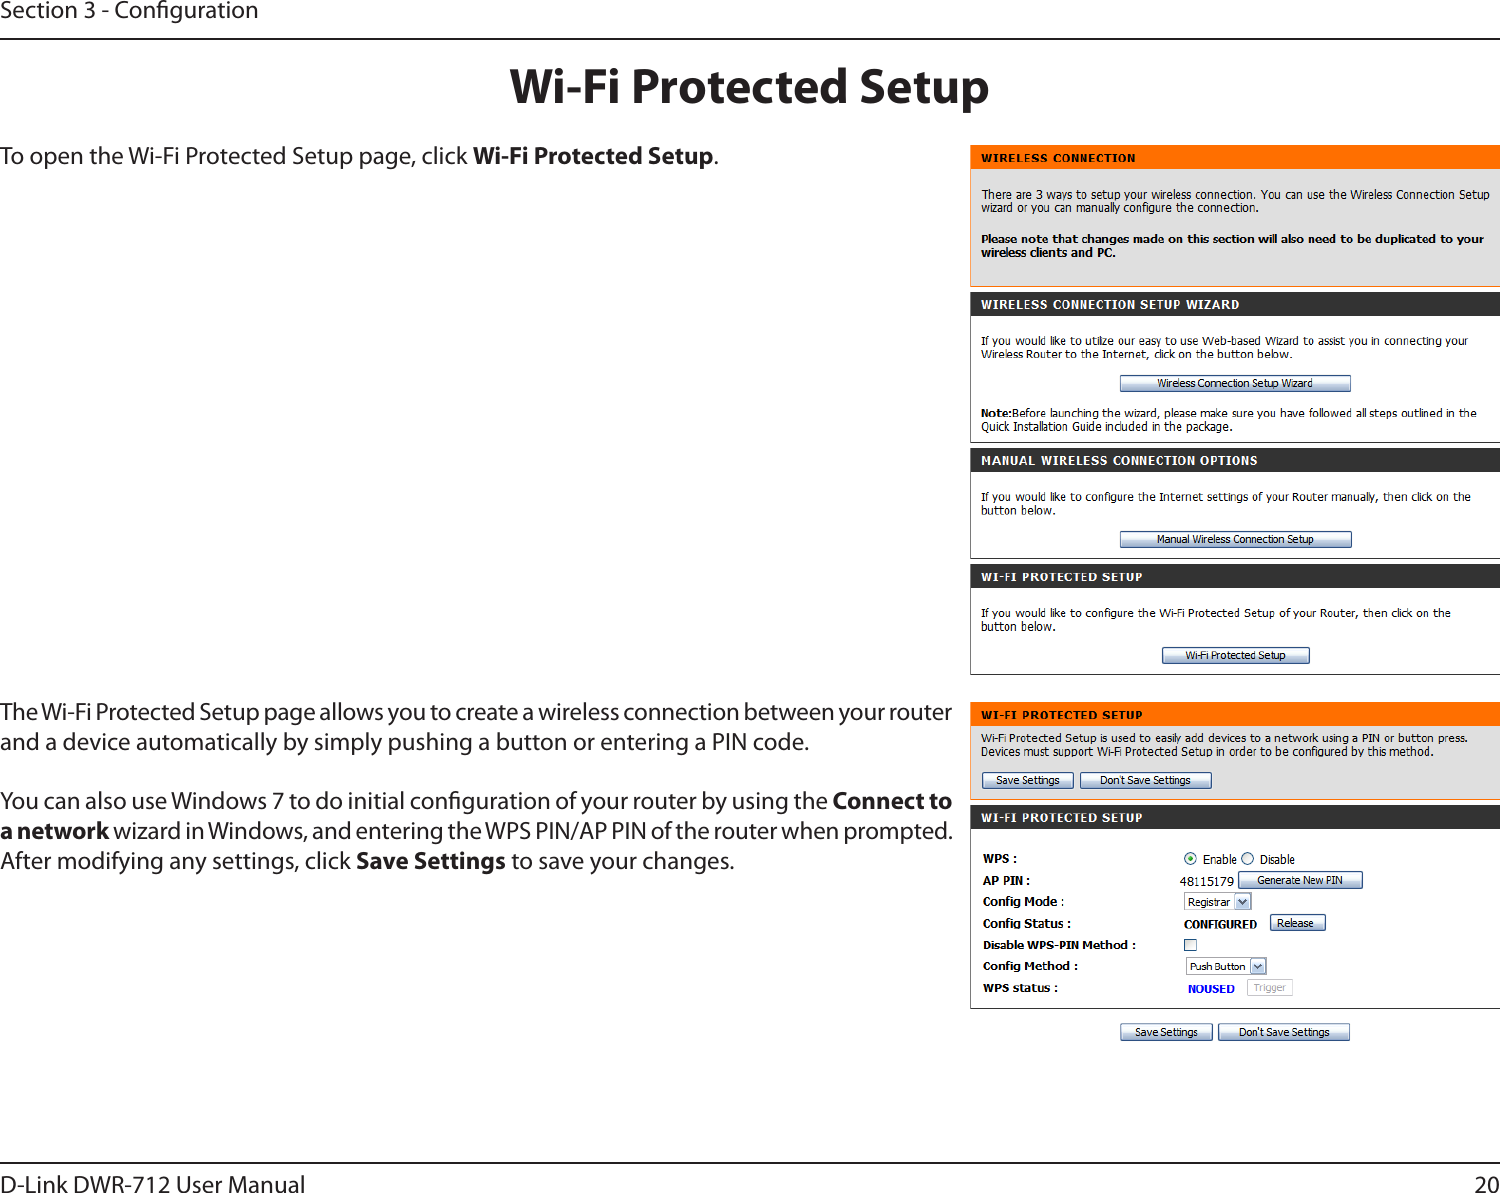 20D-Link DWR-712 User ManualSection 3 - CongurationWi-Fi Protected SetupTo open the Wi-Fi Protected Setup page, click Wi-Fi Protected Setup.The Wi-Fi Protected Setup page allows you to create a wireless connection between your router and a device automatically by simply pushing a button or entering a PIN code. You can also use Windows 7 to do initial conguration of your router by using the Connect to a network wizard in Windows, and entering the WPS PIN/AP PIN of the router when prompted. After modifying any settings, click Save Settings to save your changes.